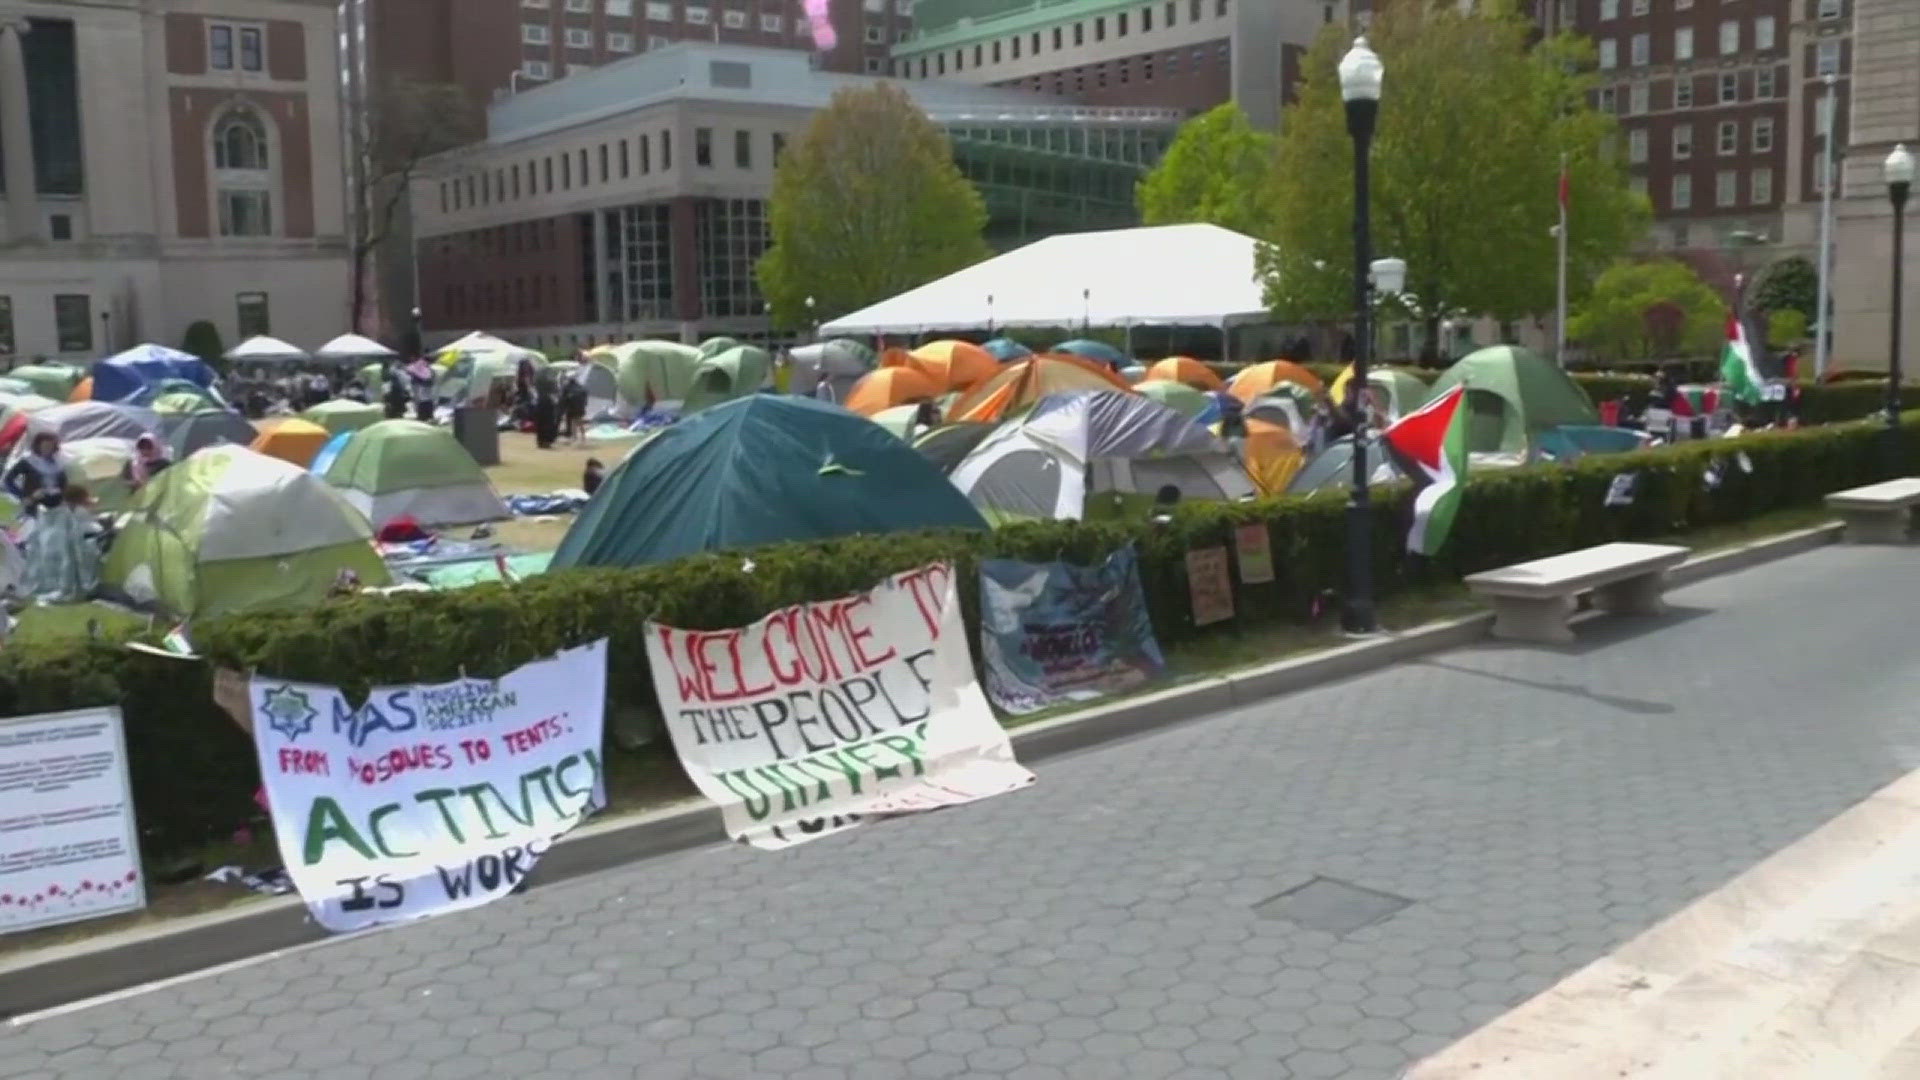 After two weeks, Columbia University is giving anti-war demonstrators encamped on campus until Monday afternoon to clear out or risk suspension.